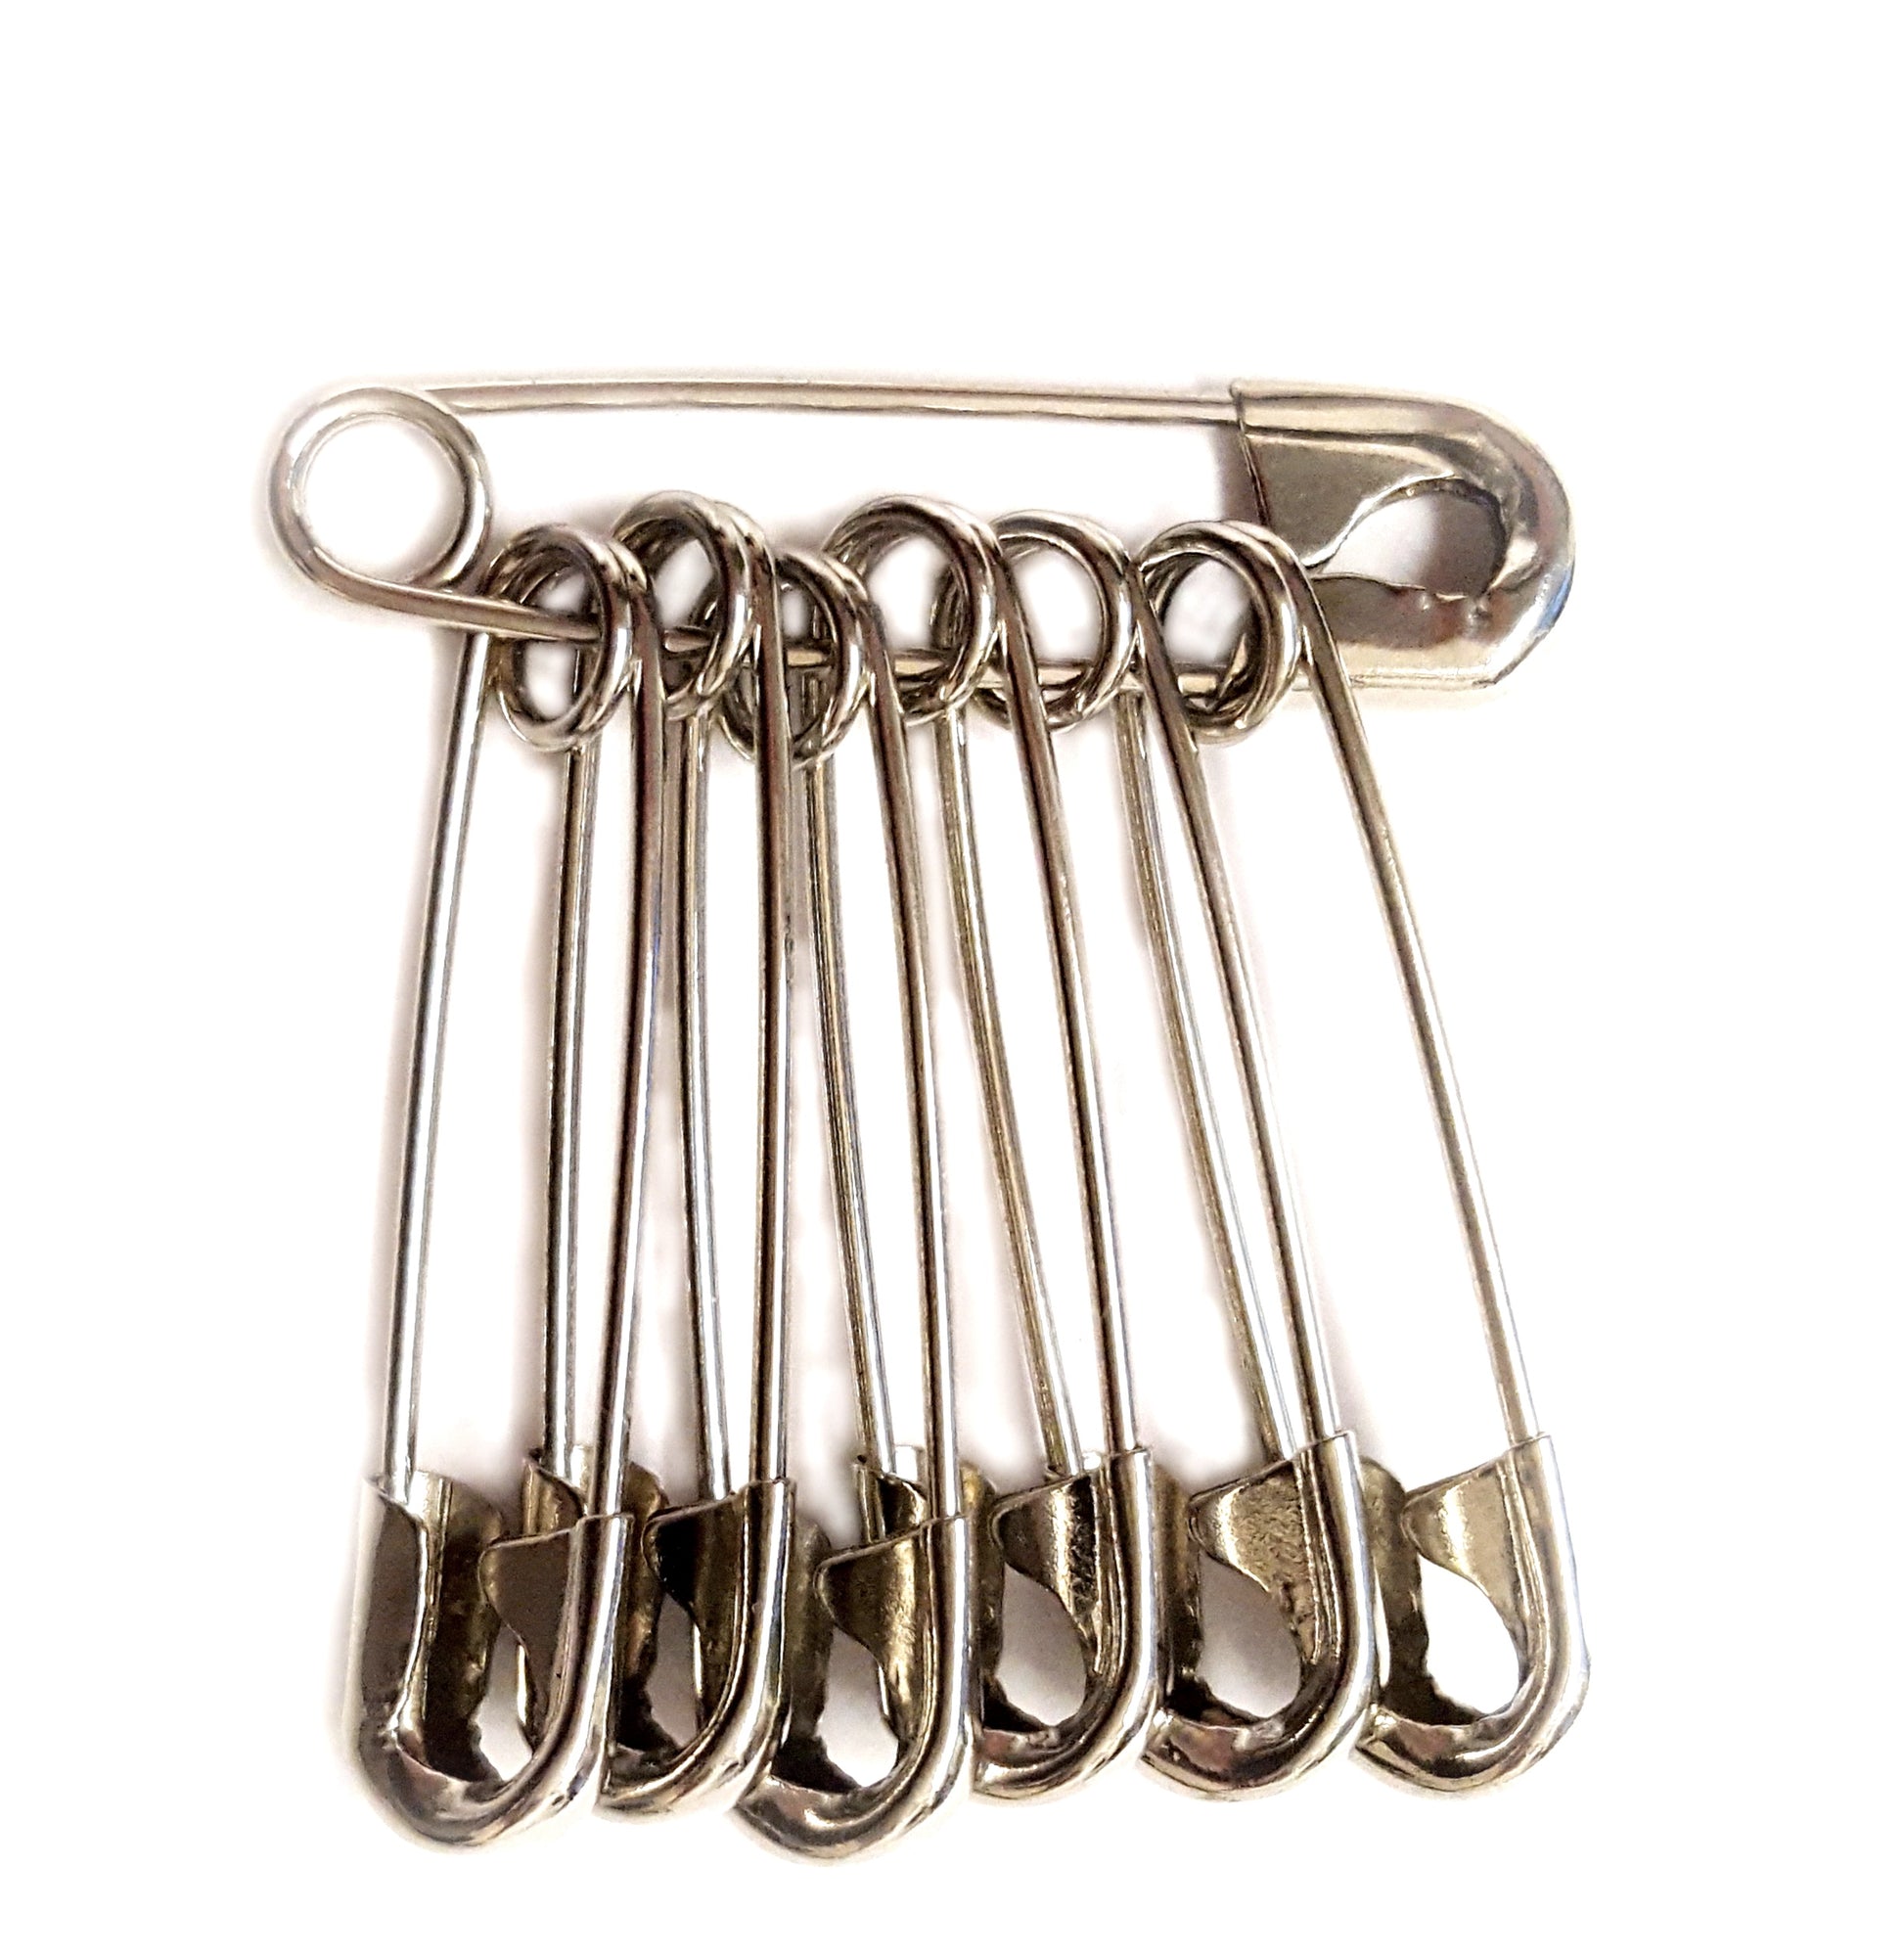 NiftyPlaza Heavy Duty Large 1-1/2 Safety Pins - 1000 Pcs - High-Grade –